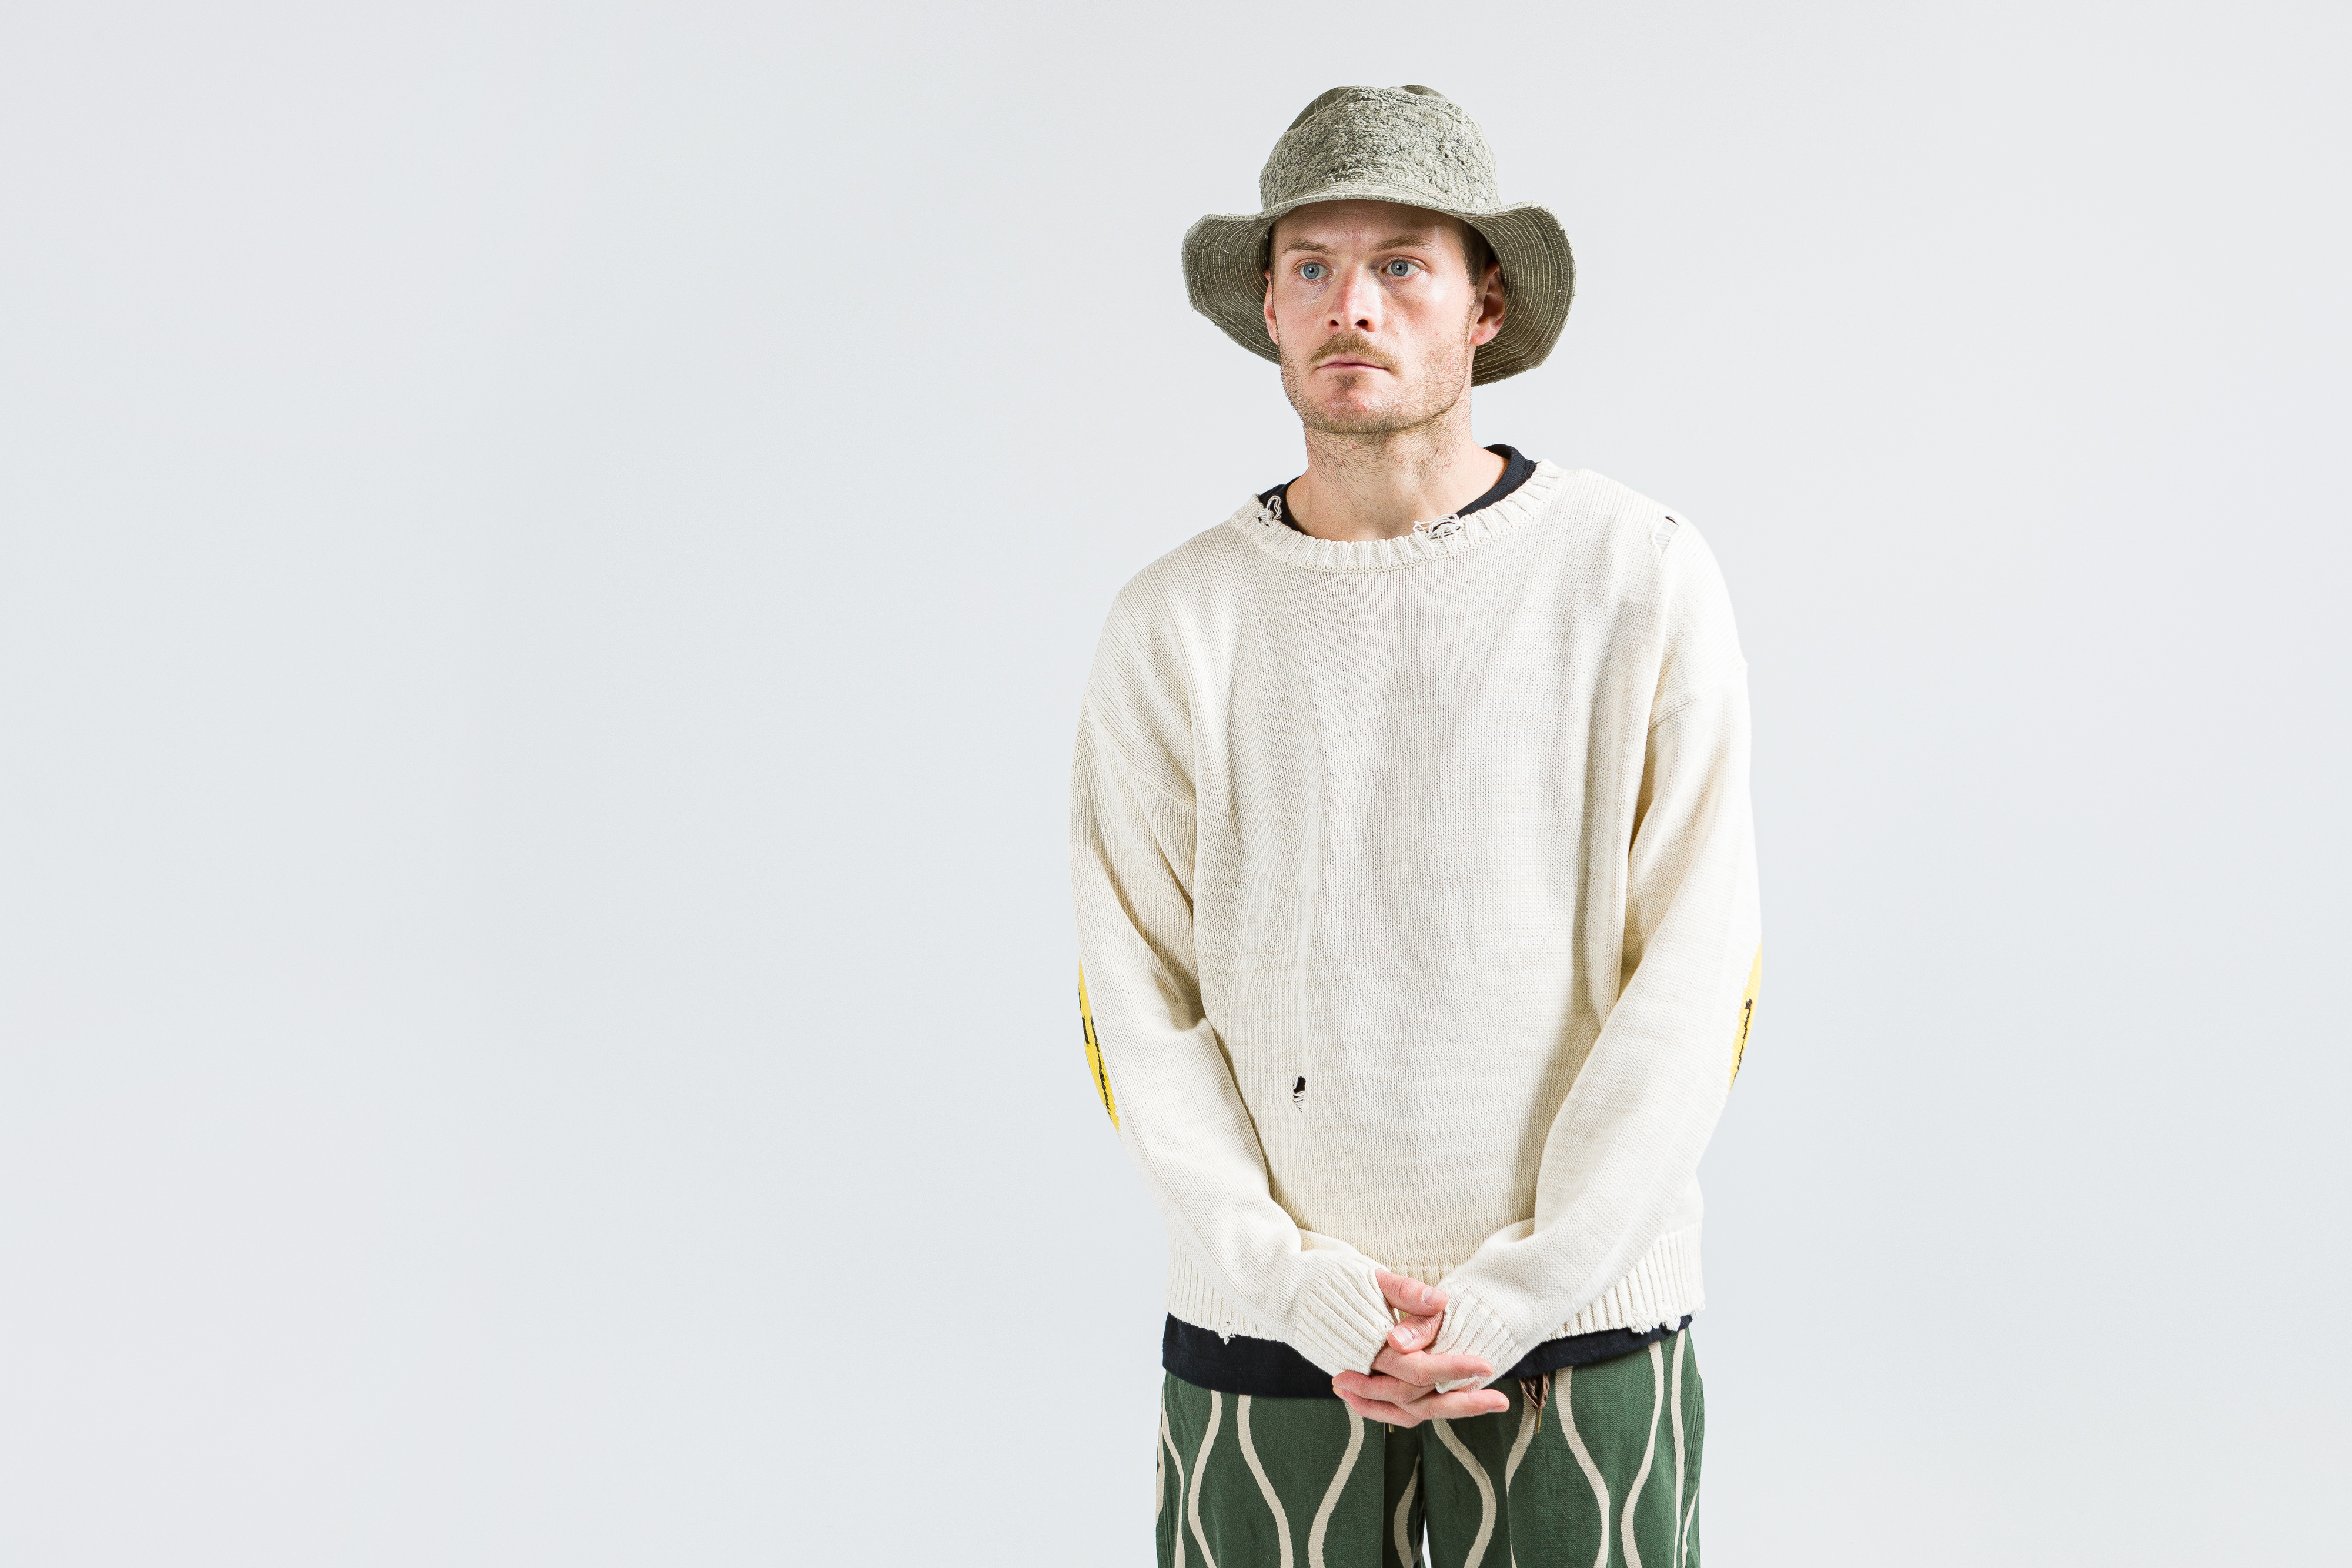 Up There Store - Kapital Kountry Spring/Summer '21